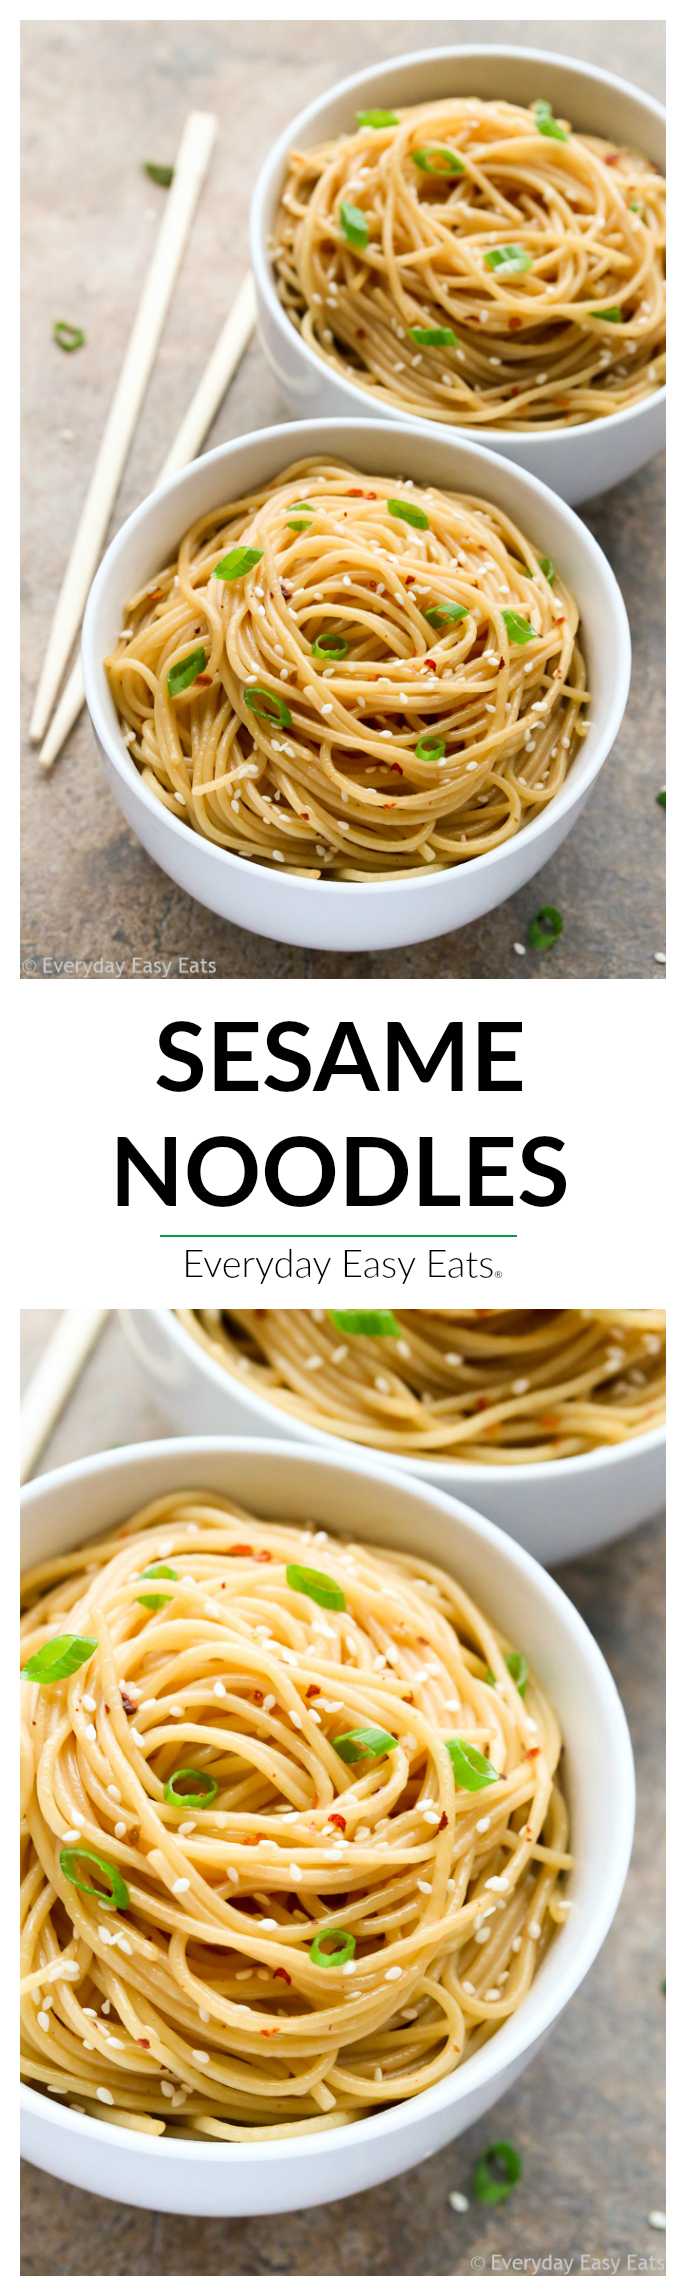 Sesame Noodles - A super-easy recipe that requires just 15 minutes to make! | EverydayEasyEats.com